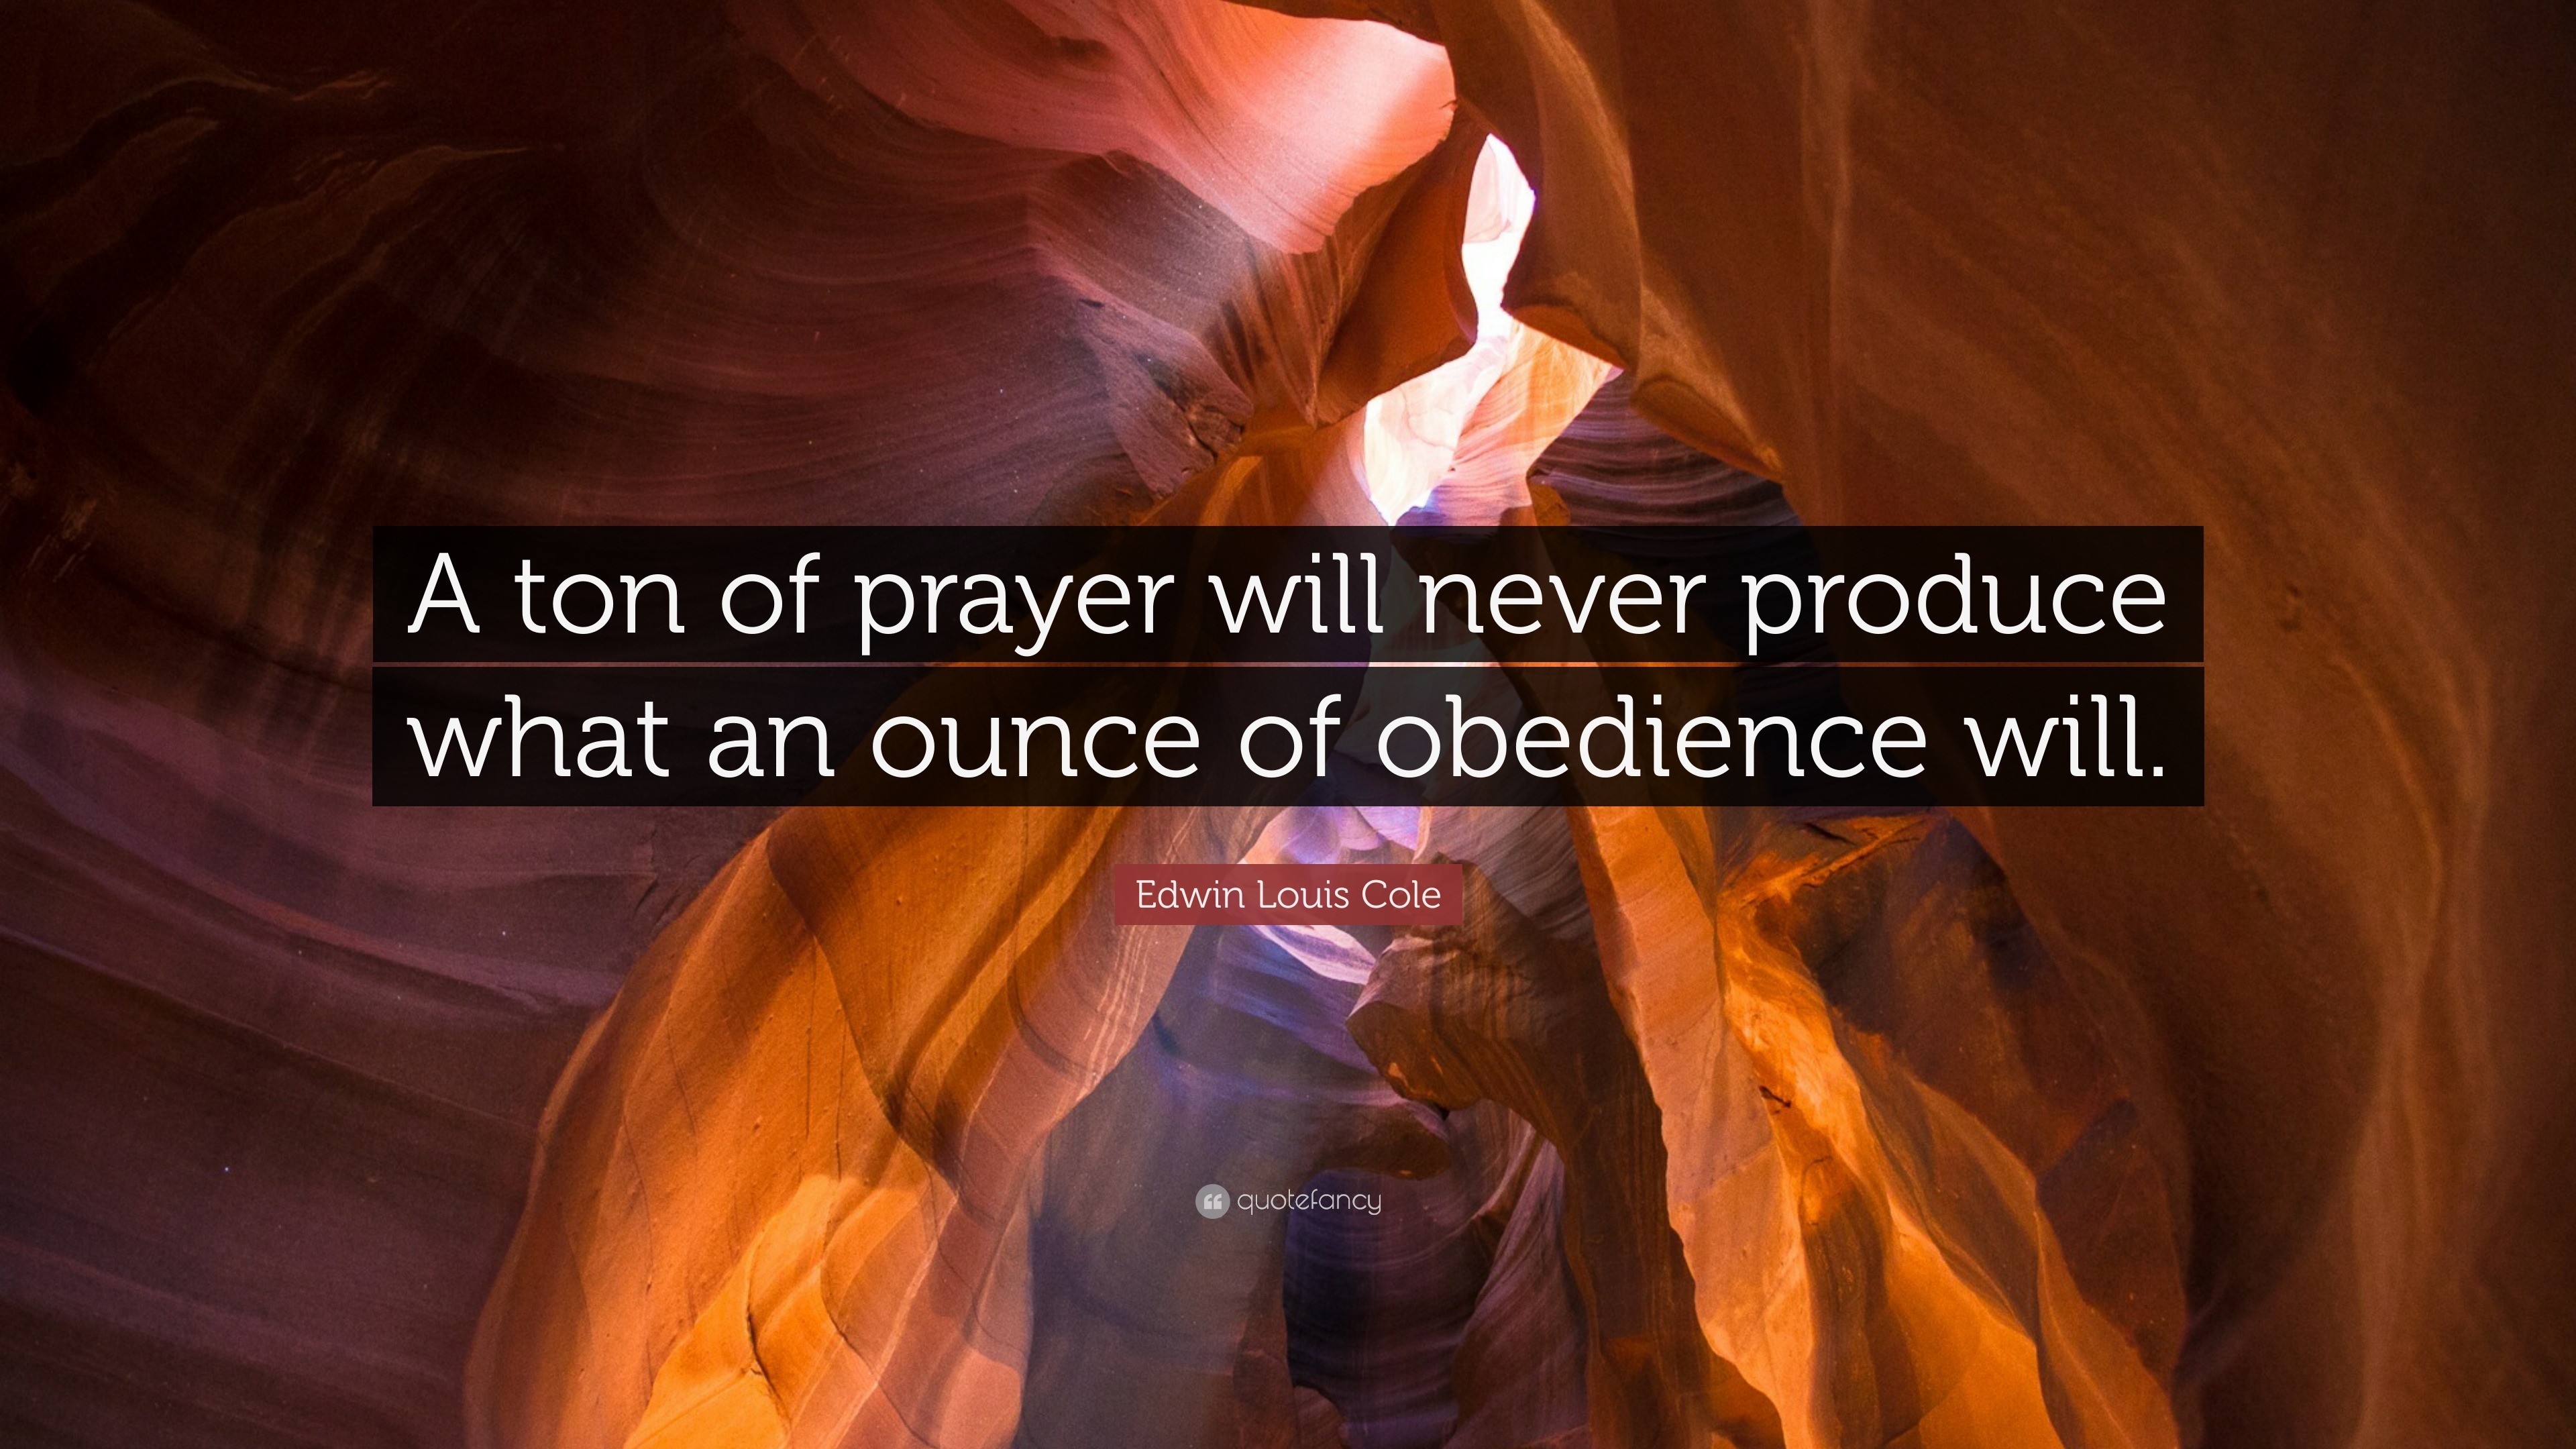 Edwin Louis Cole Quote: “A ton of prayer will never produce what an ounce  of obedience